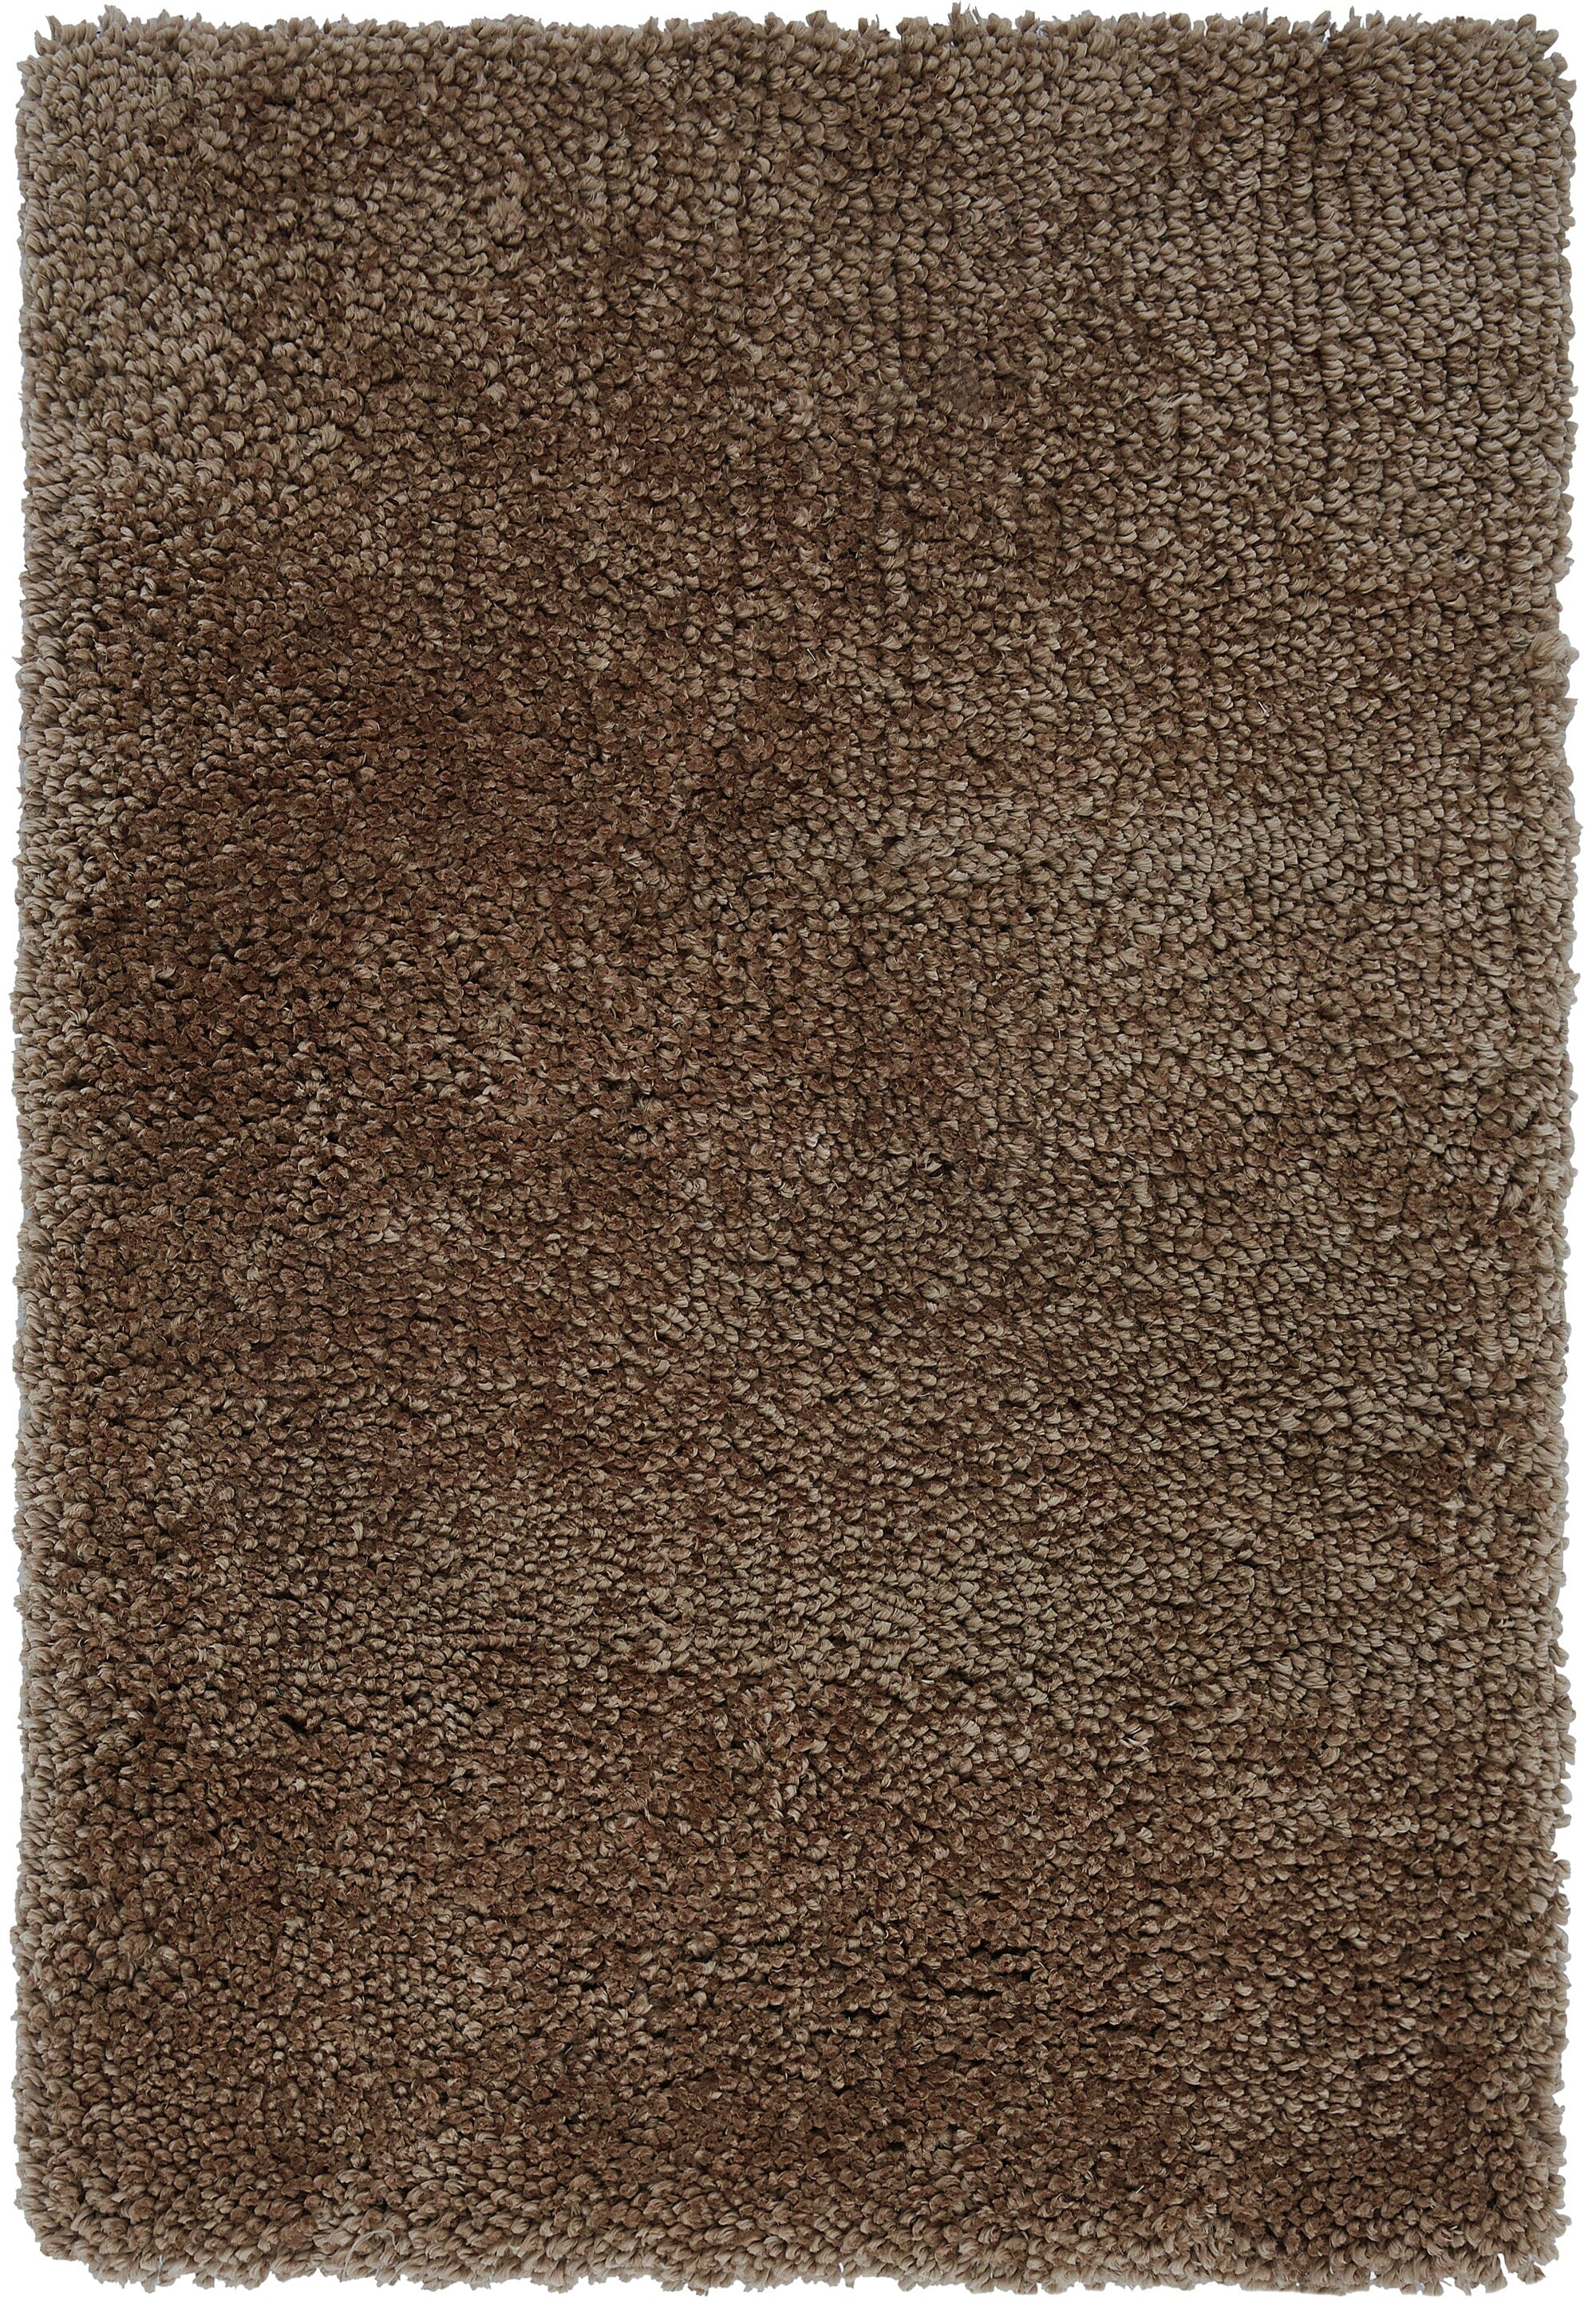 Spiral Taupe Shaggy Rug